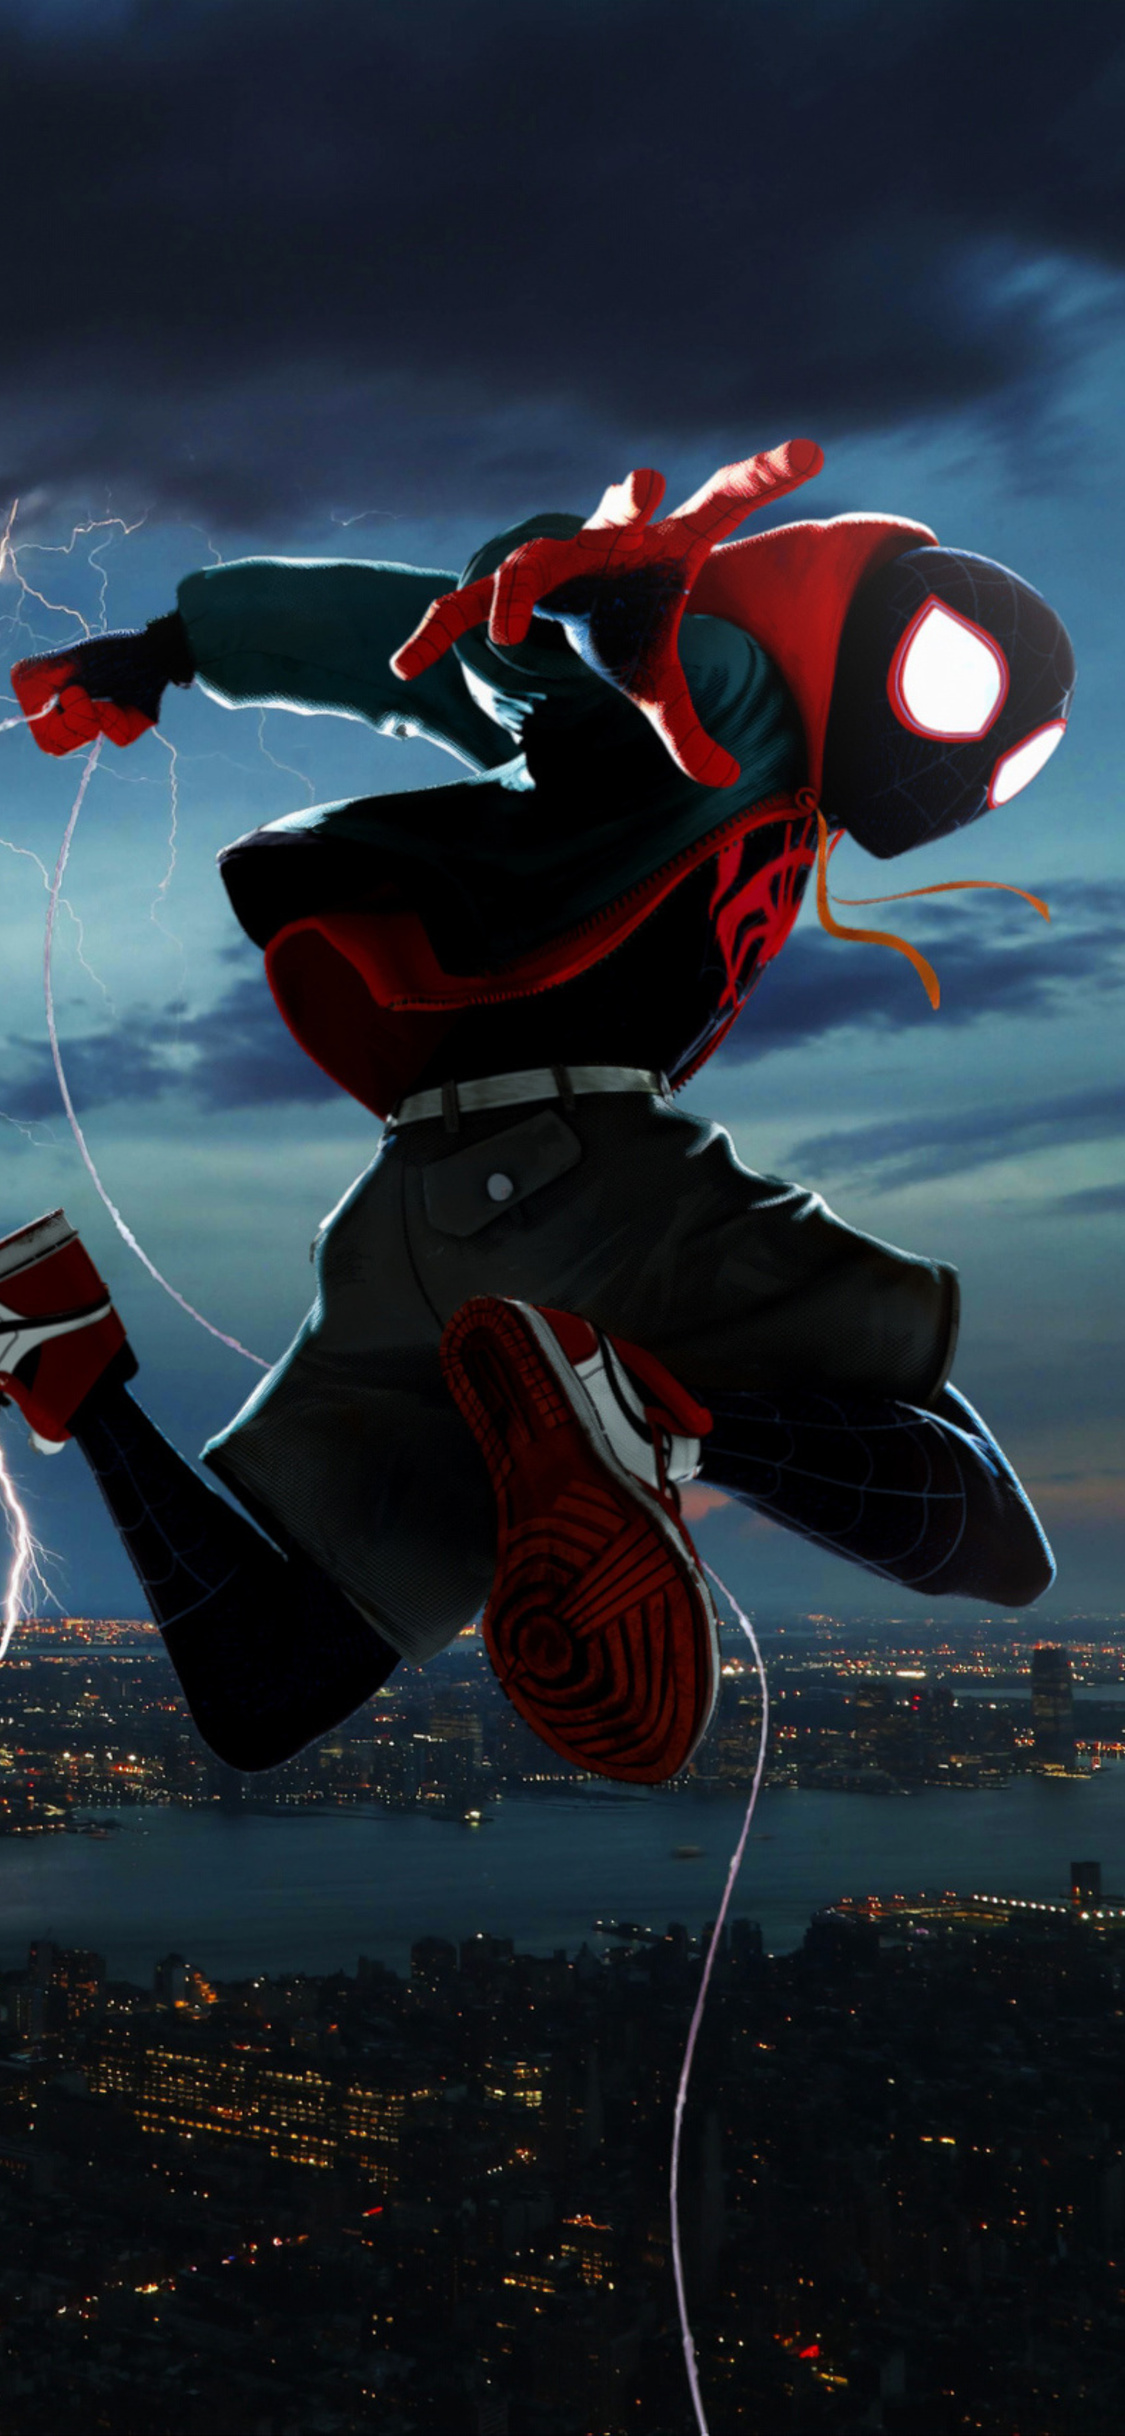 1125x2436 Spider Verse Spiderman Artwork Iphone XS,Iphone 10,Iphone X HD 4k Wallpapers, Images ...